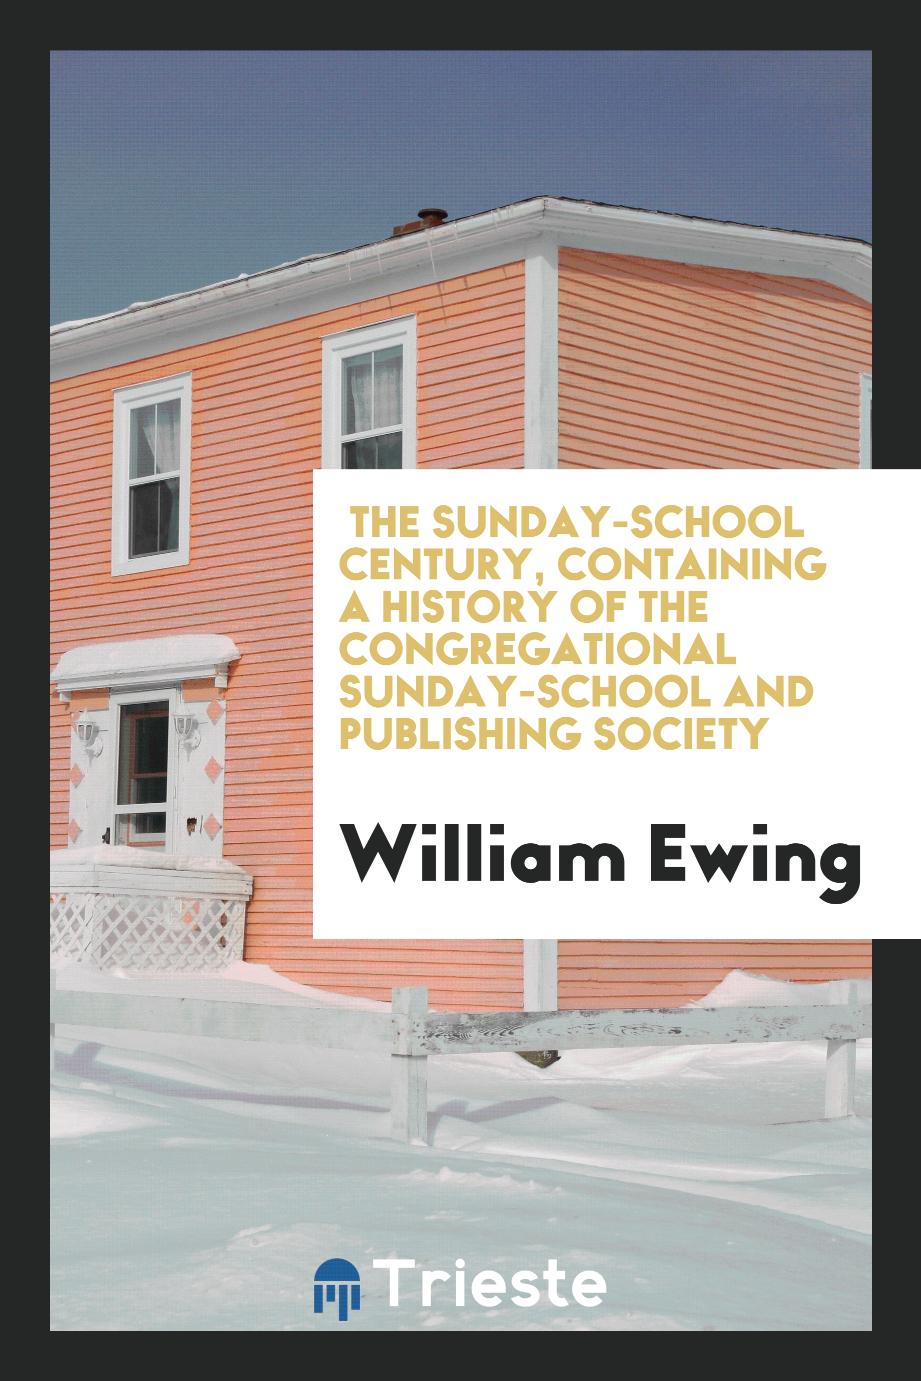 The Sunday-School Century, Containing a History of the Congregational Sunday-School and Publishing Society